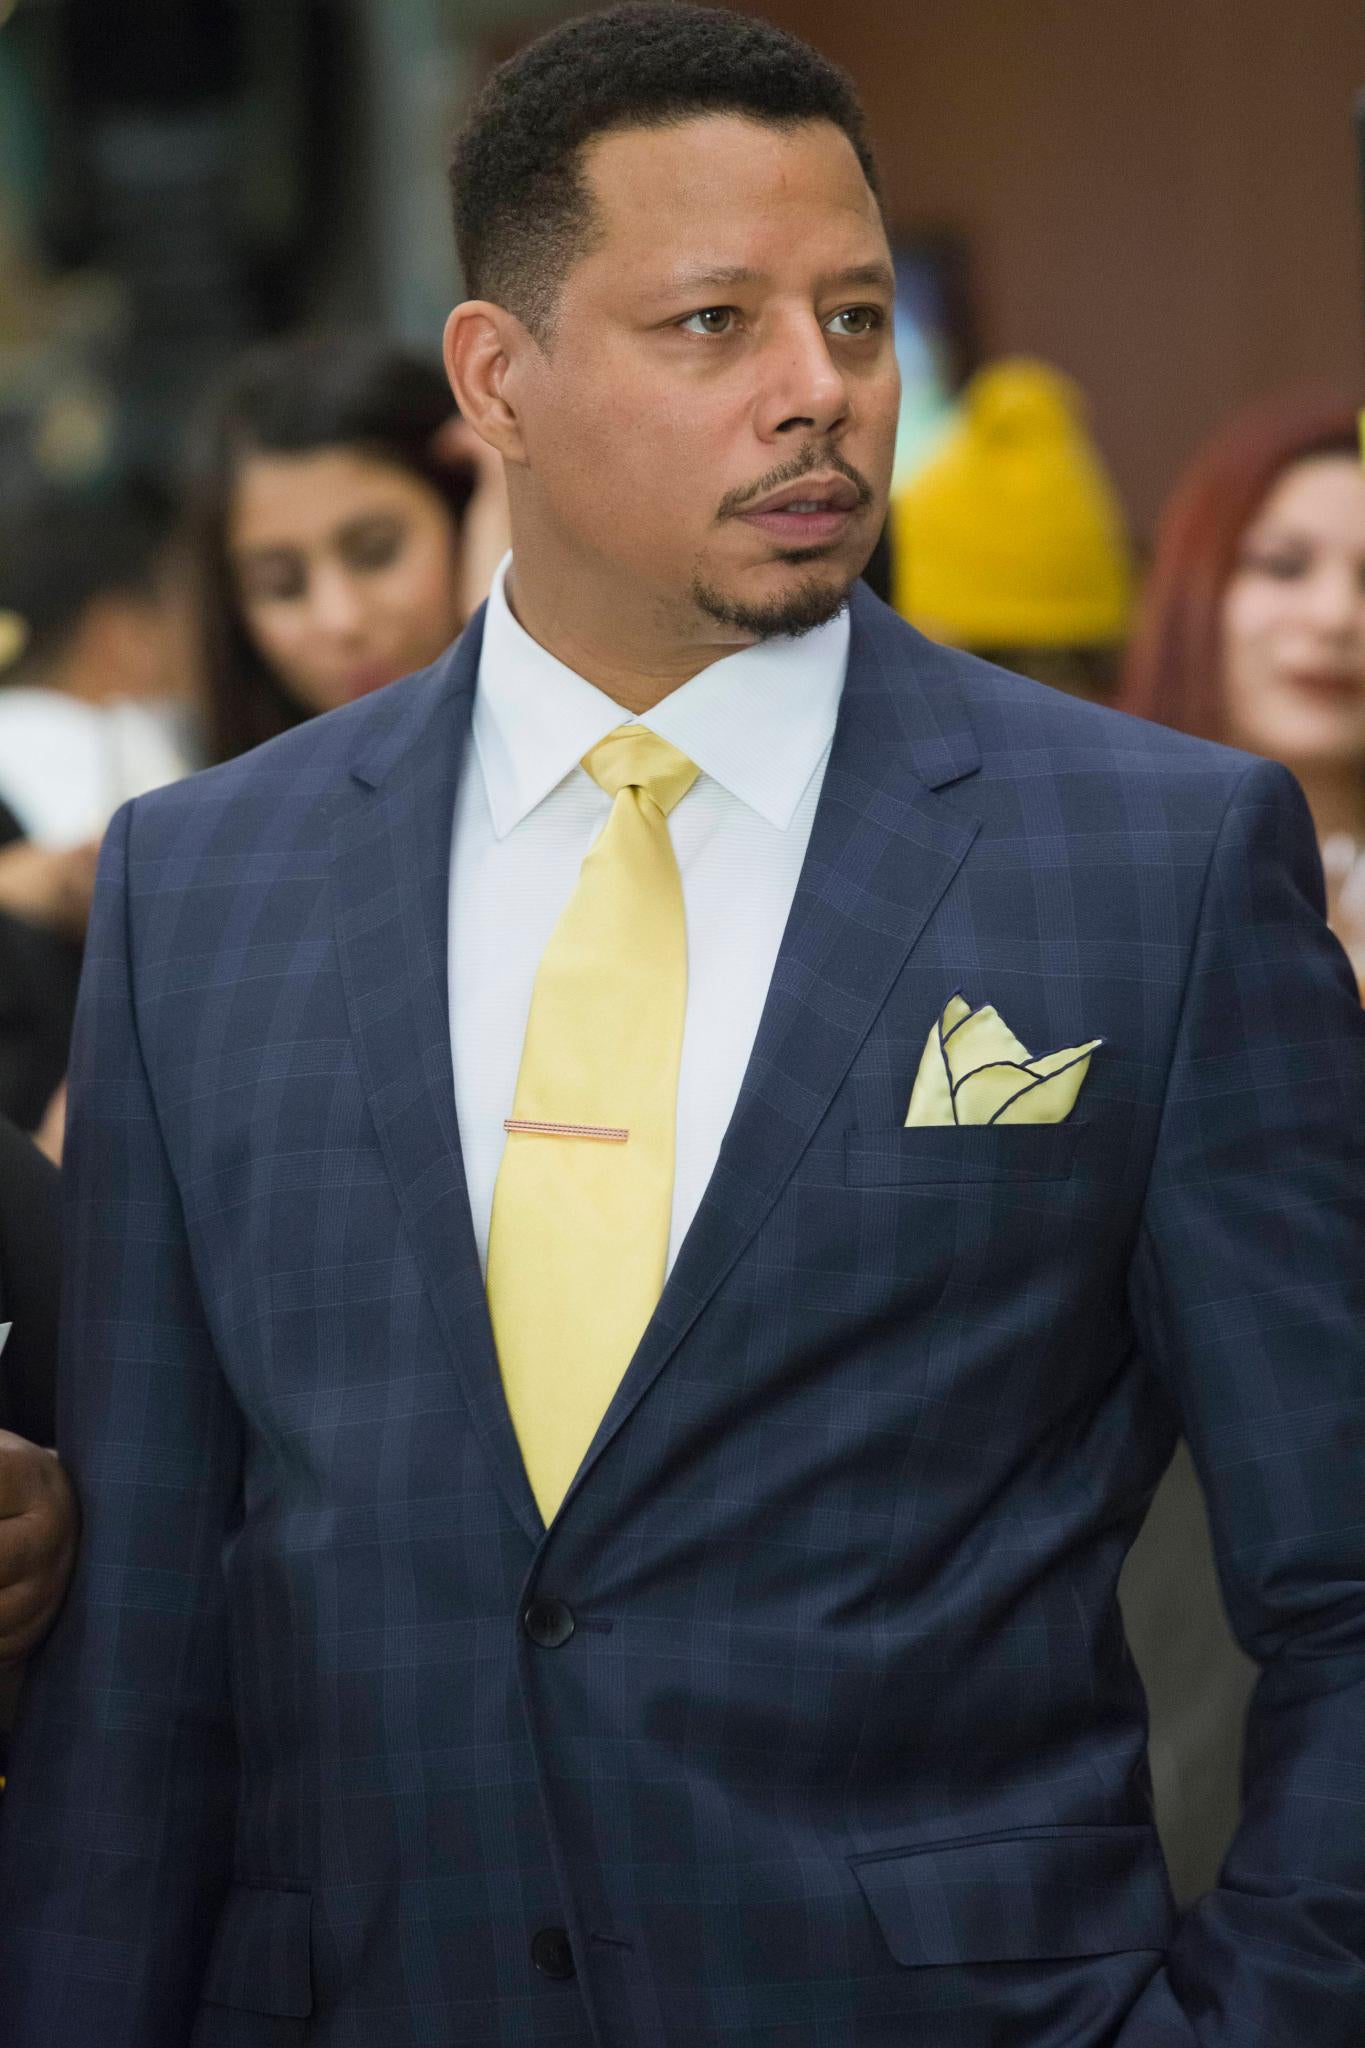 13 Juicy Moments We Can't Wait To See on the 'Empire' Season Finale
